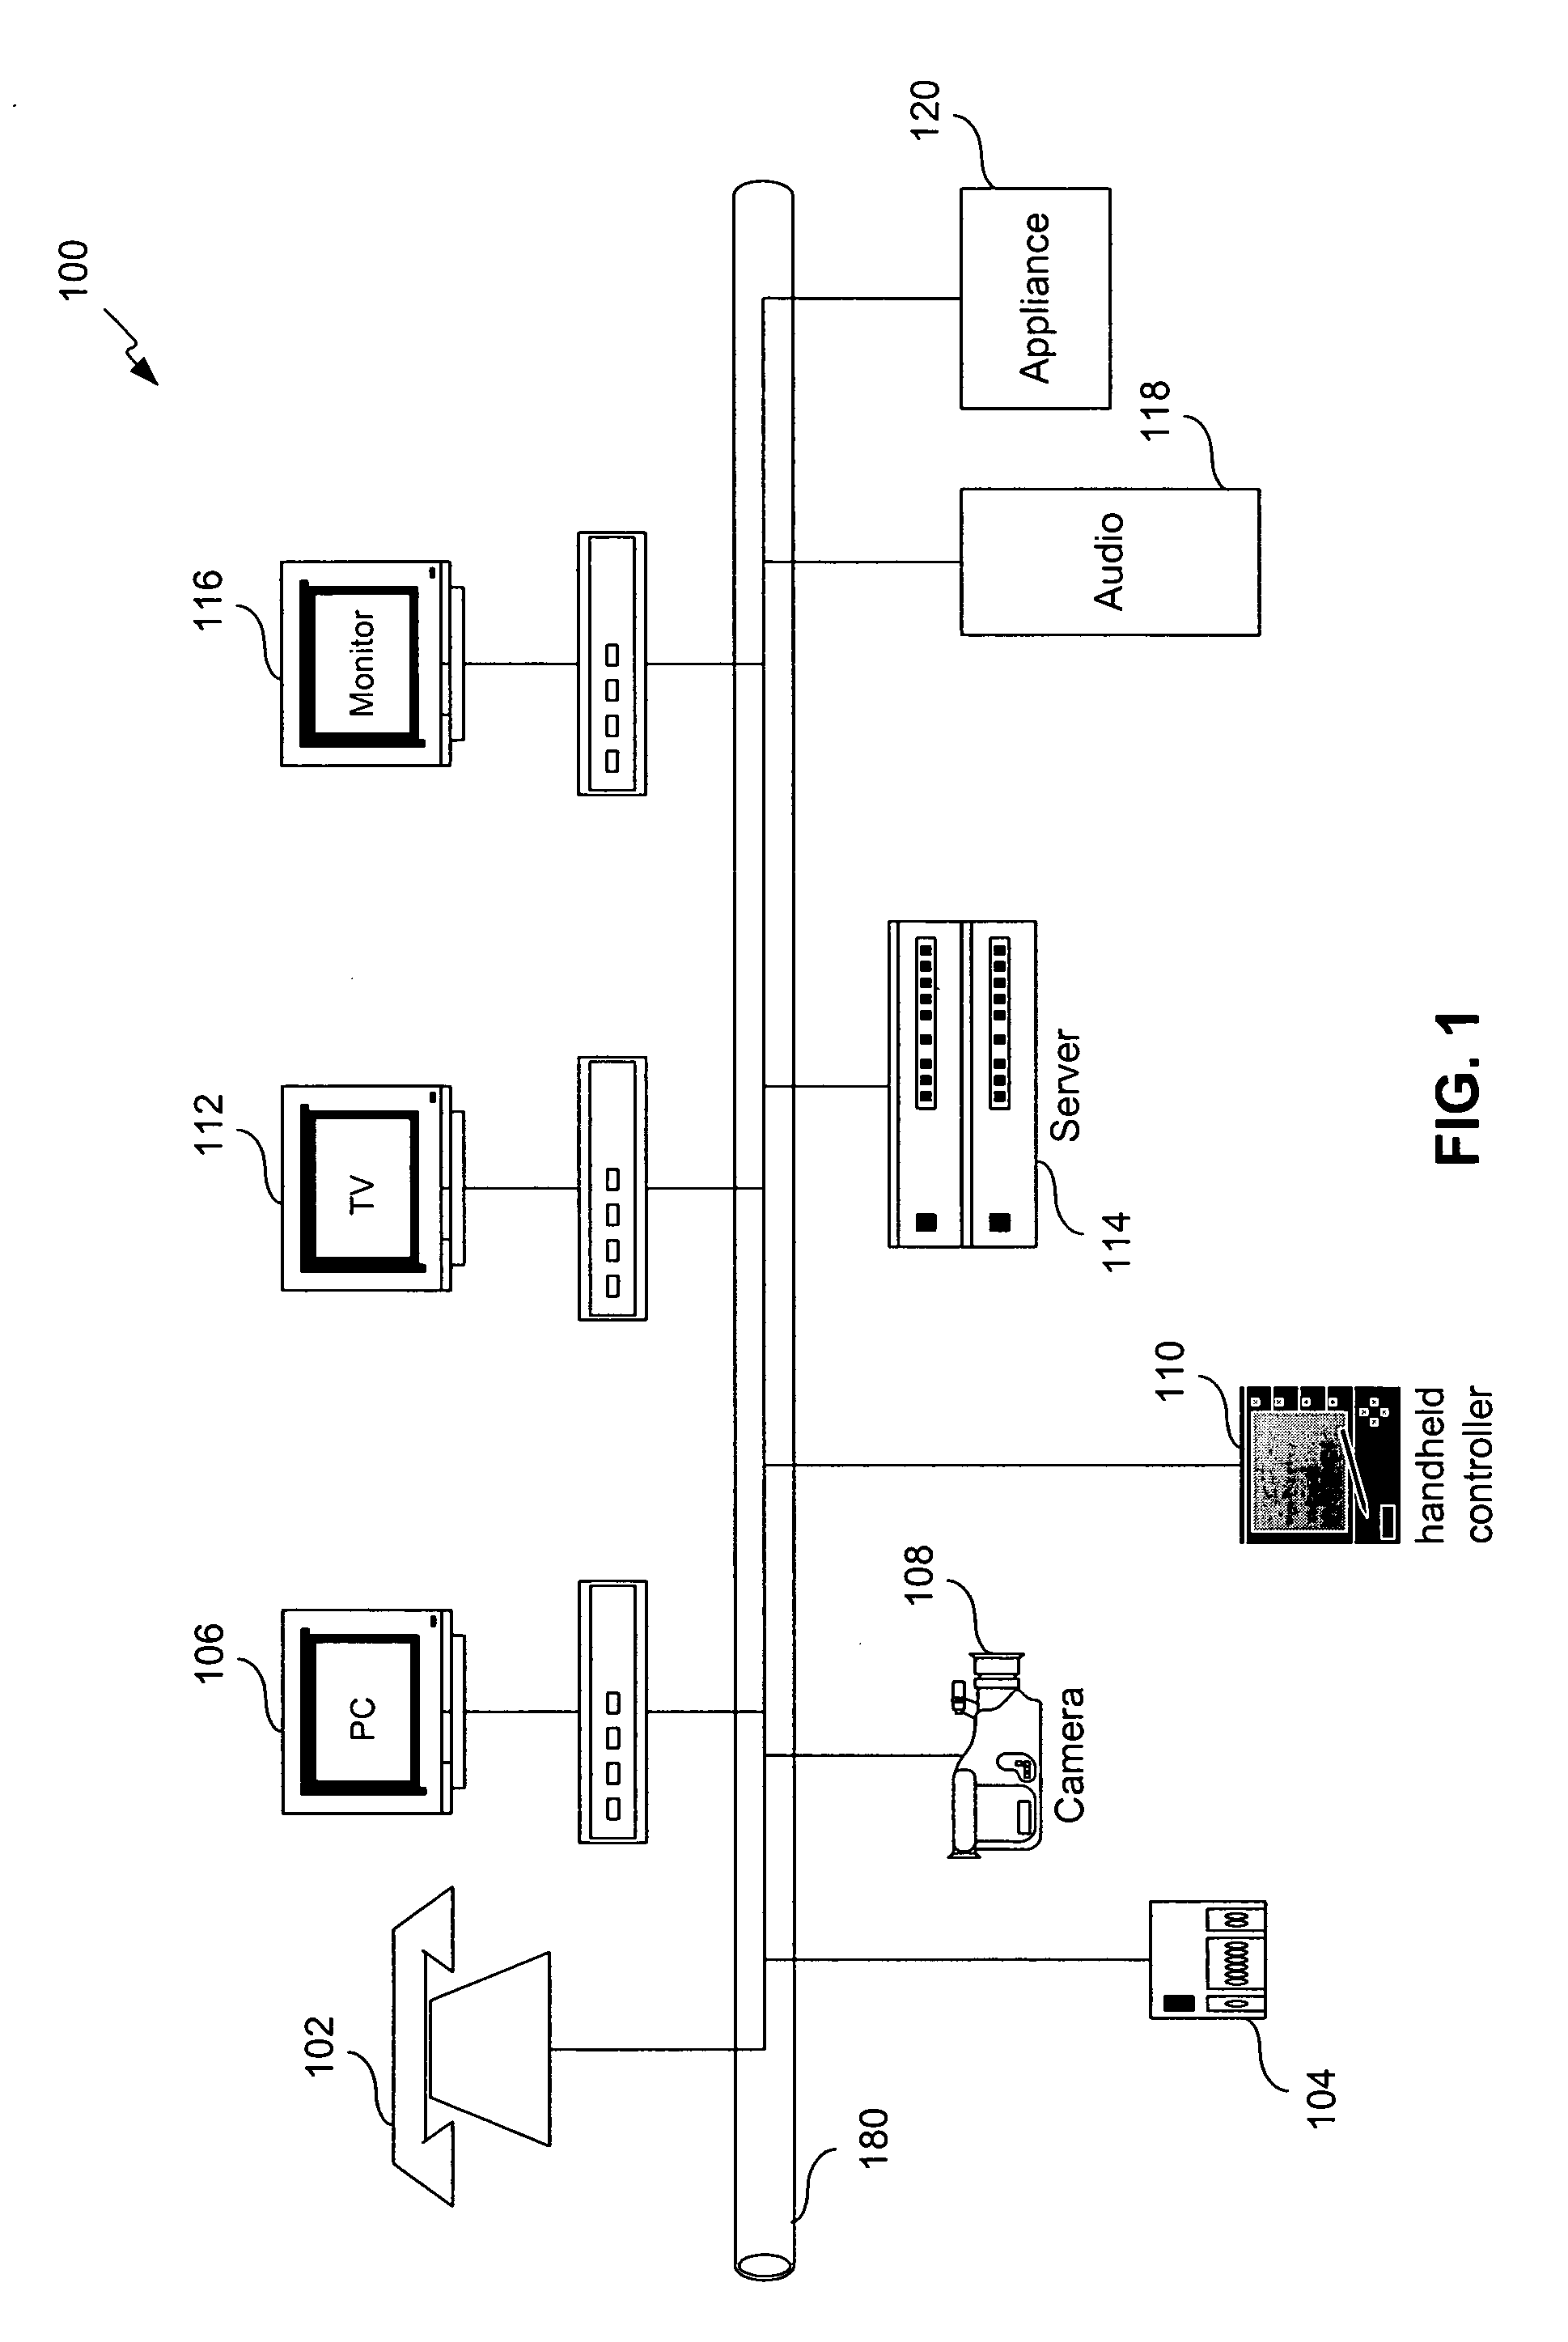 Method, system, and computer program product for managing controlled residential or non-residential environments